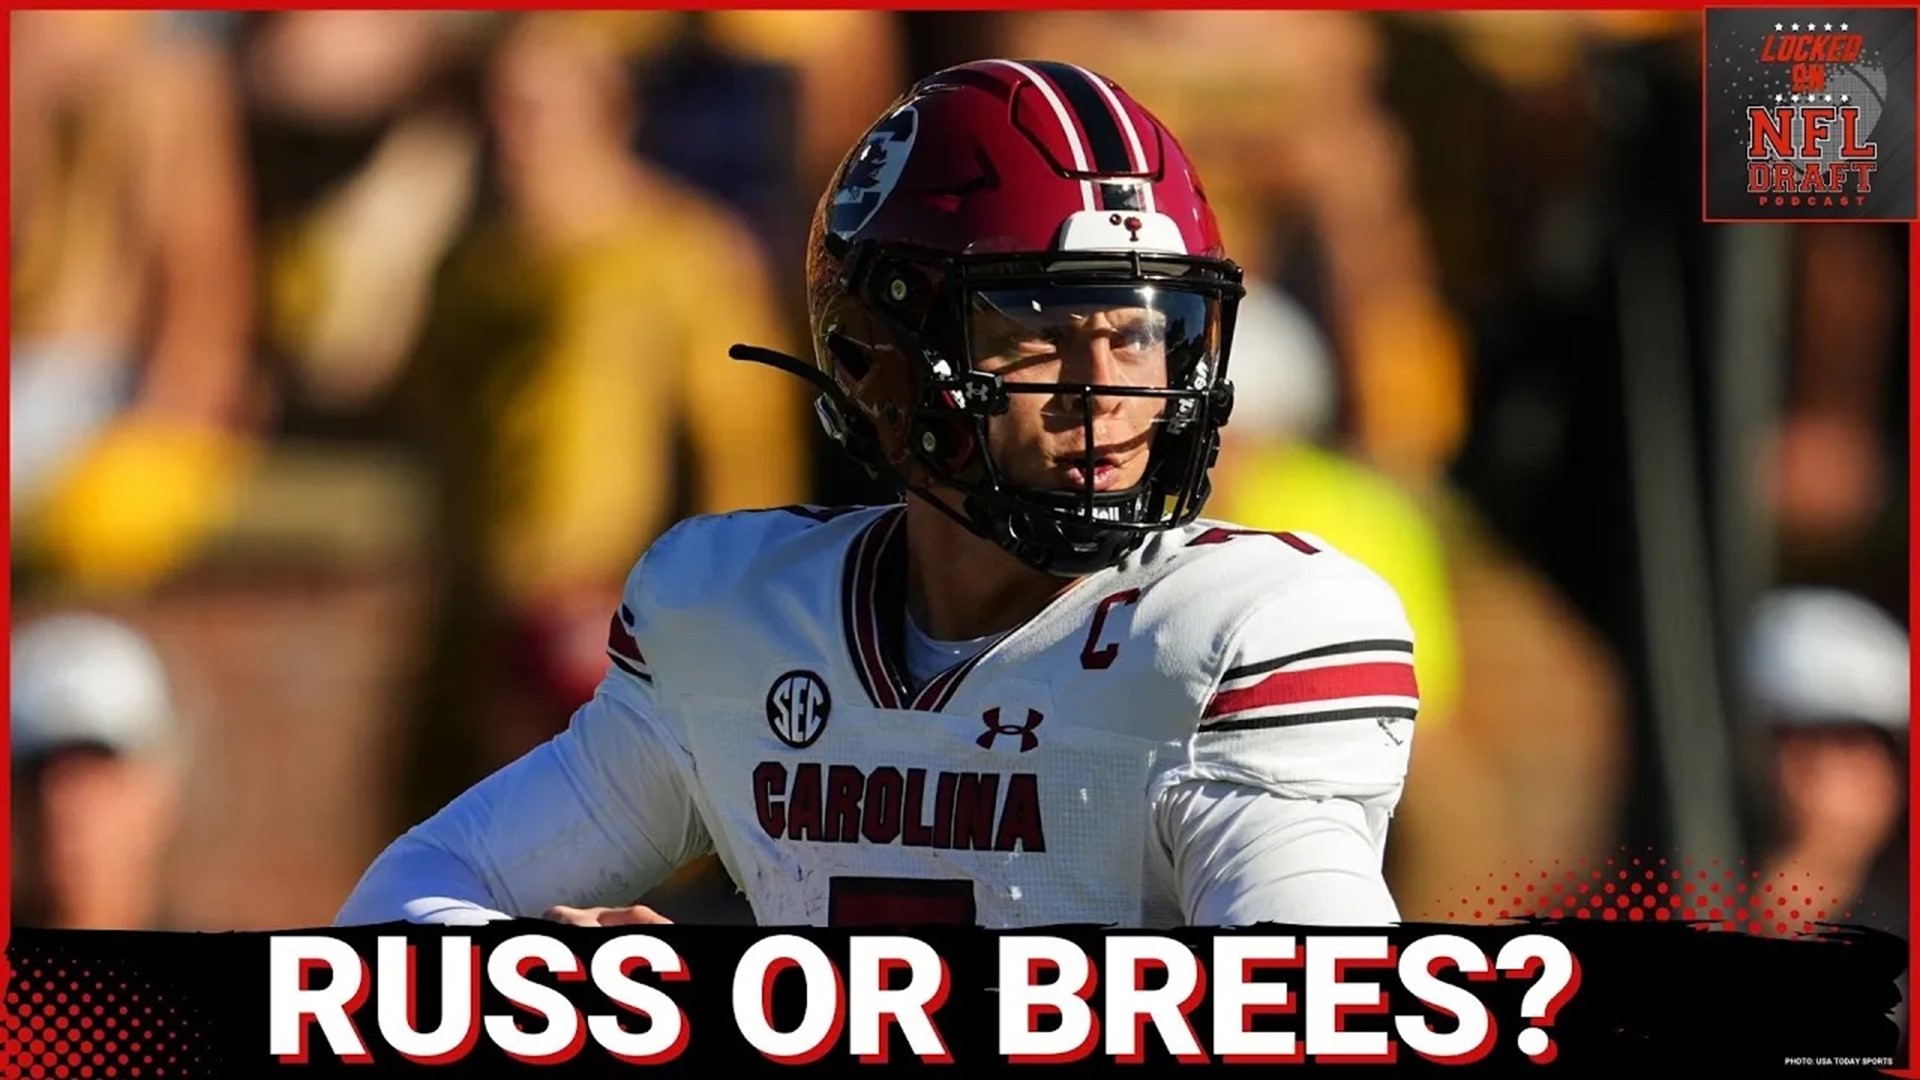 South Carolina QB Spencer Rattler is a former projected 1st overall pick. How is he viewed now and who is his best NFL comparison? The guys give their thoughts.